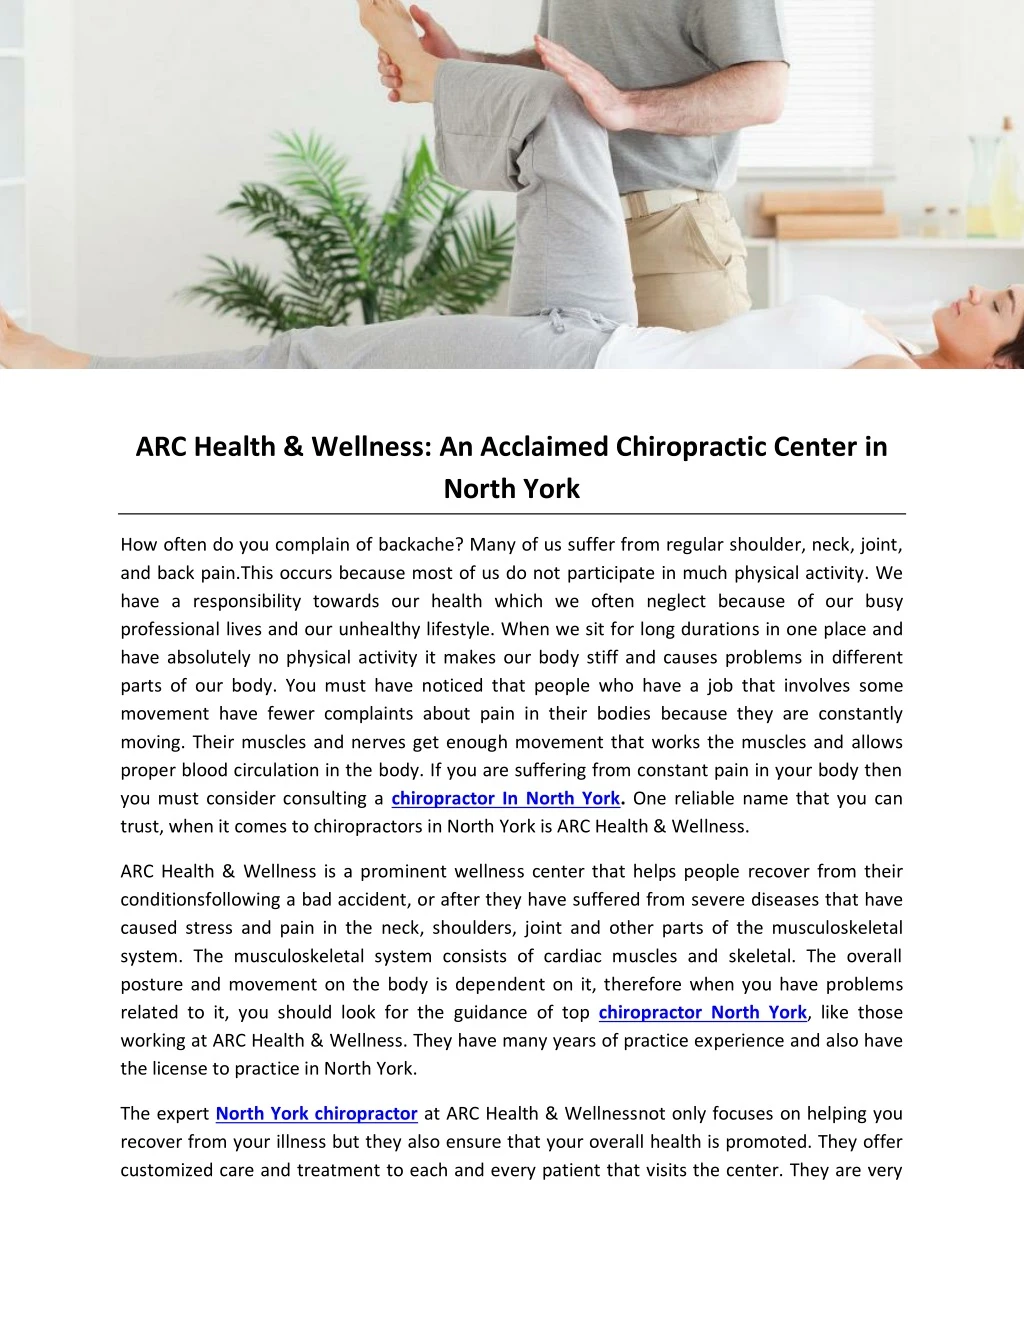 arc health wellness an acclaimed chiropractic